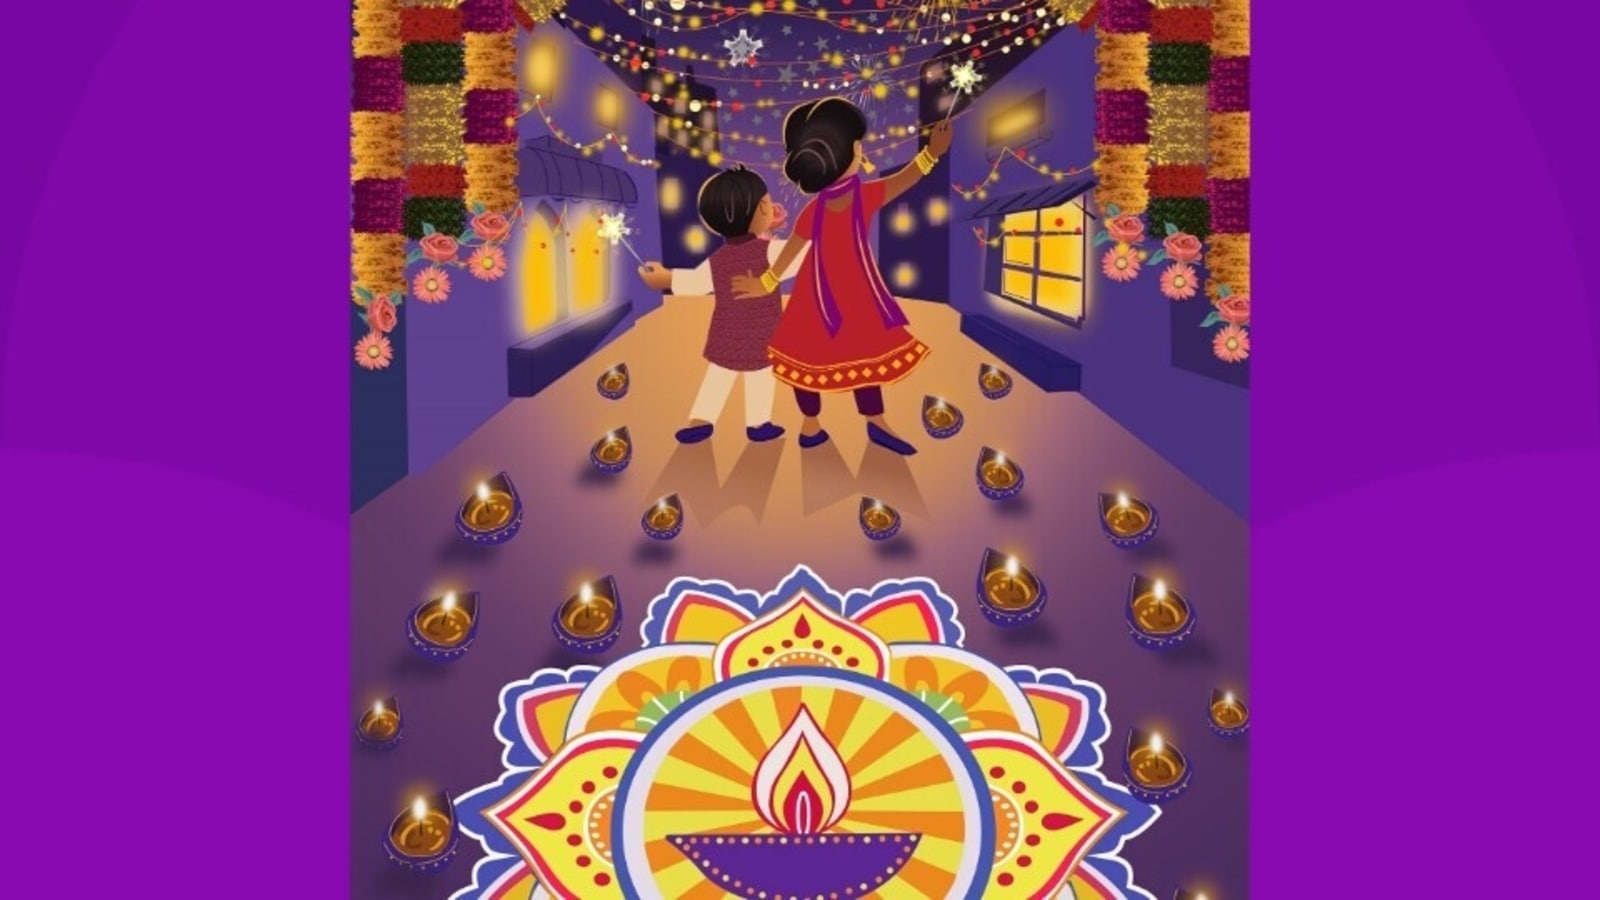 Cute Couple Kids With Diwali India Festival Theme Character Design  Illustration Royalty Free SVG, Cliparts, Vectors, and Stock Illustration.  Image 179778831.